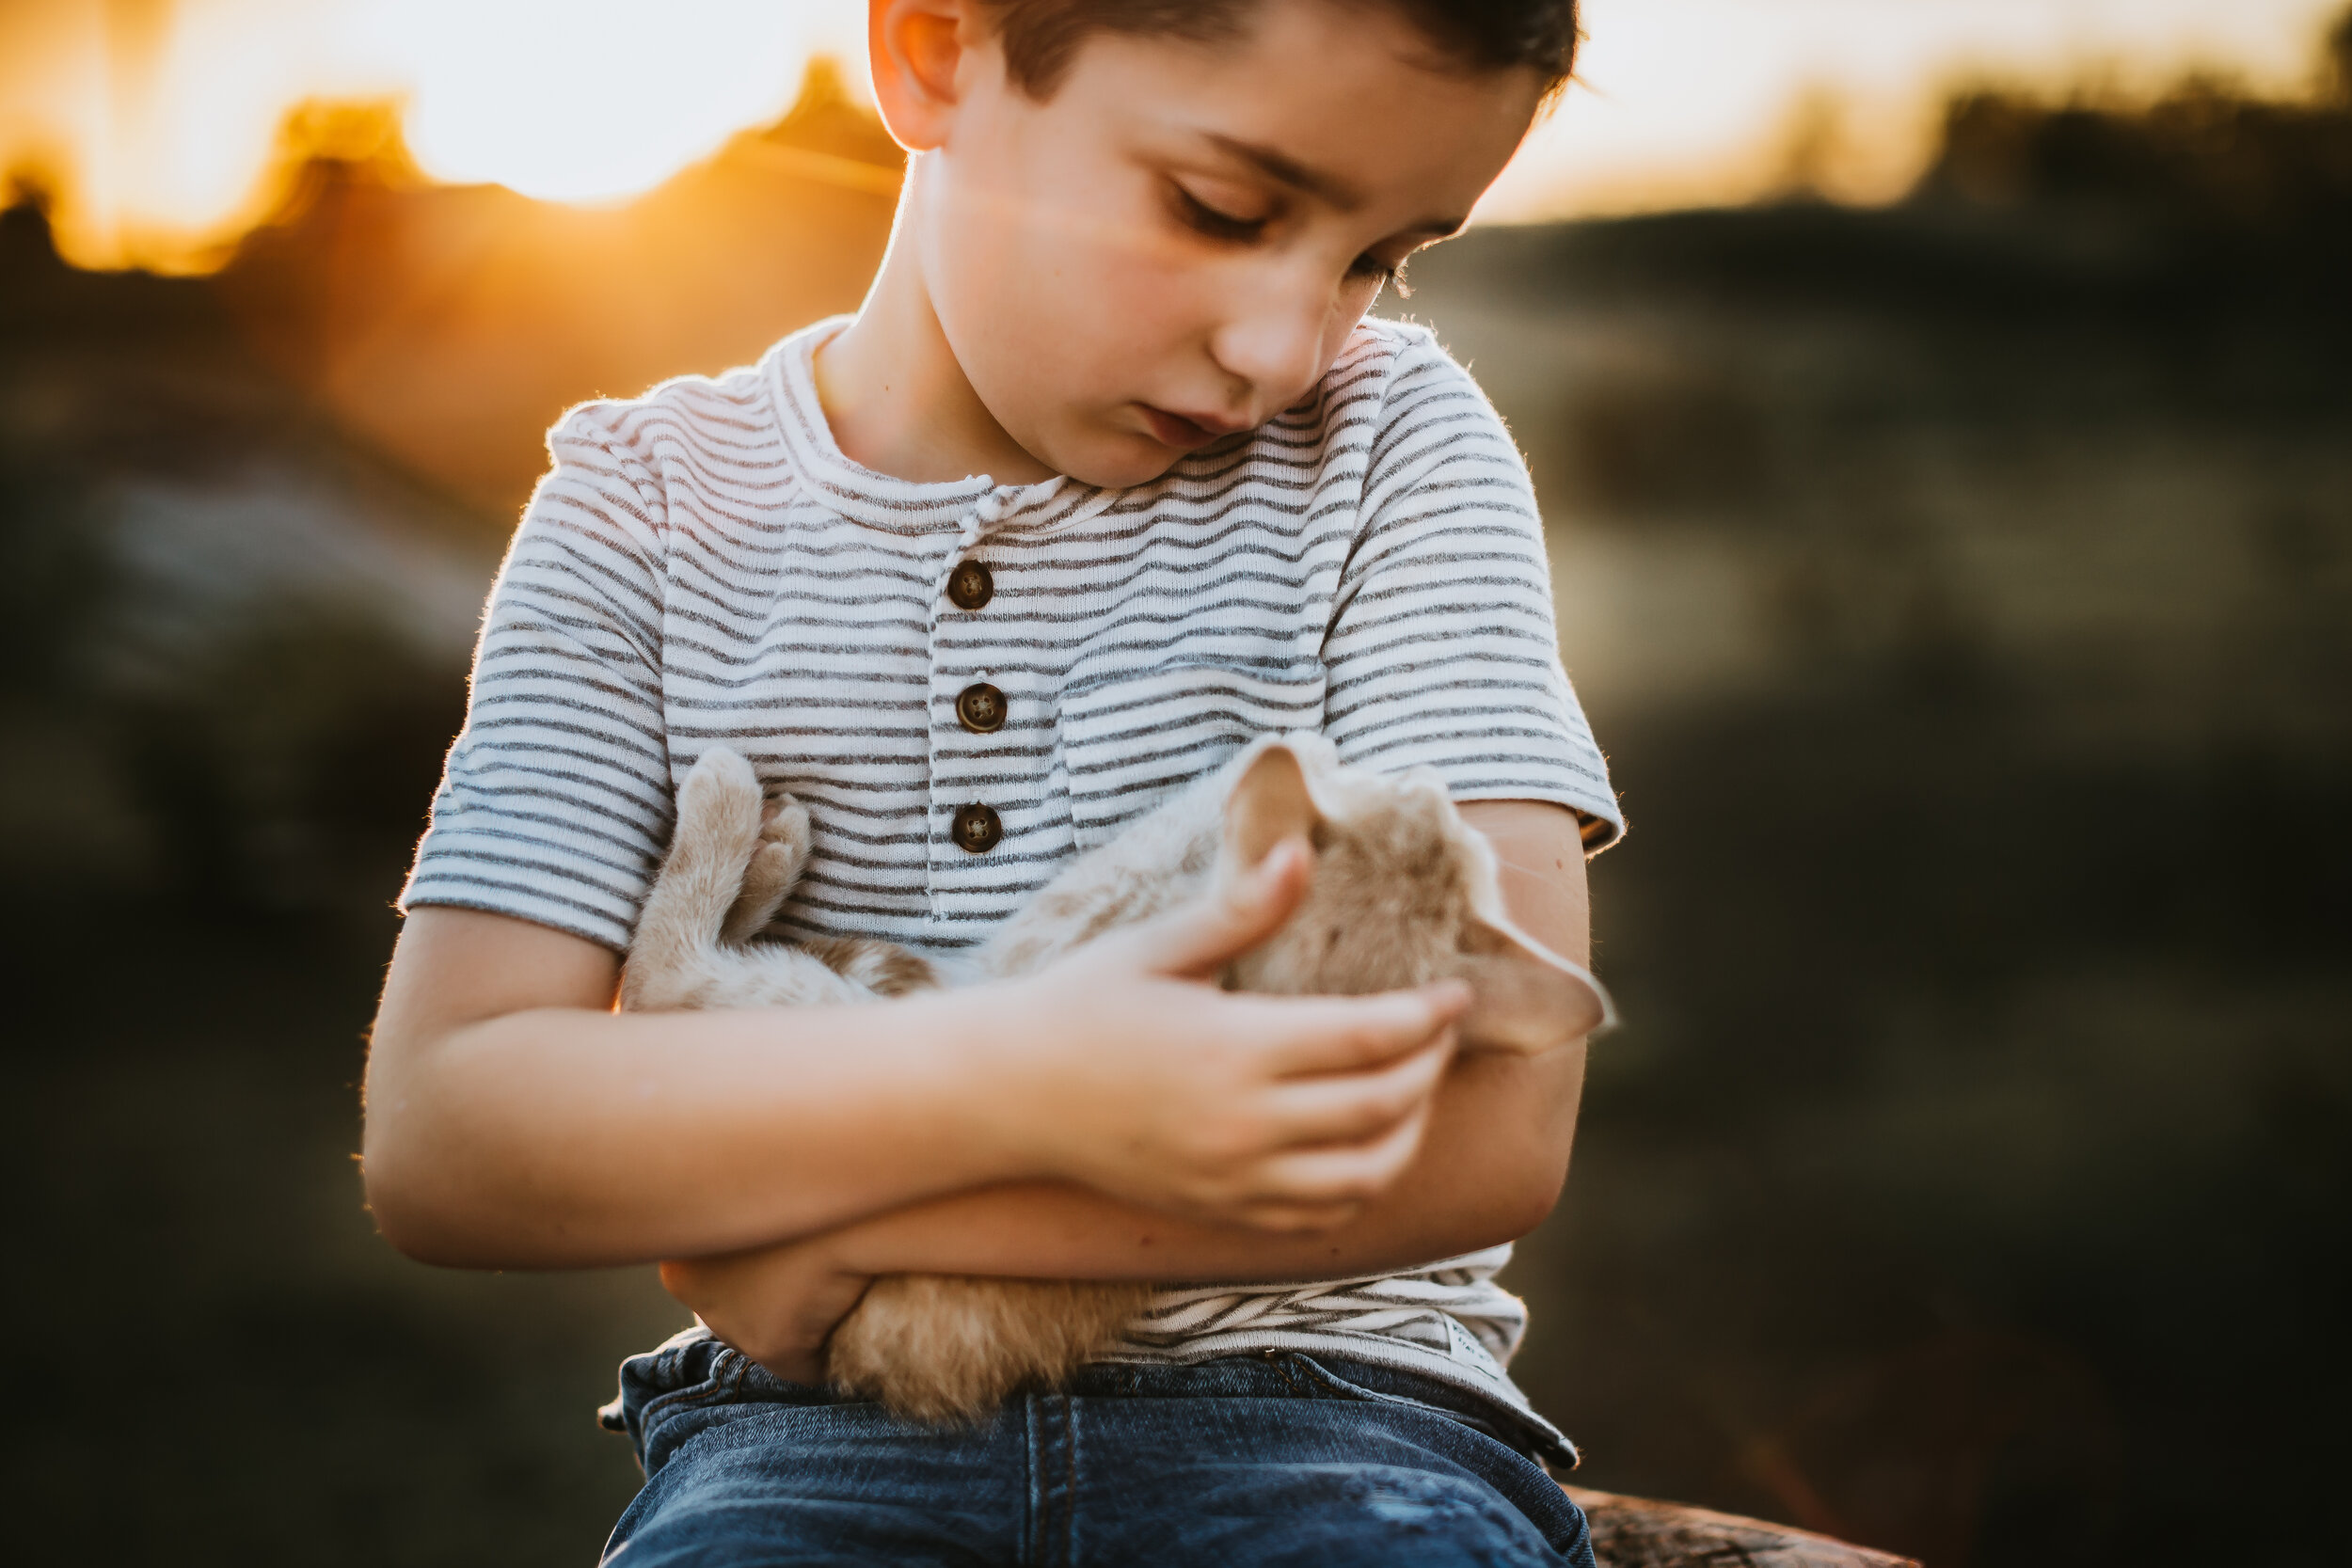  Furry friends who are part of the family should make their way into these photos. They capture such a sweet bond #tealawardphotography #texasfamilyphotographer #amarillophotographer #amarillofamilyphotographer #lifestylephotography #fallphotos #familyphotoshoot #family #lovingsiblings #photographytips #familyphotos #naturalfamilyinteraction 